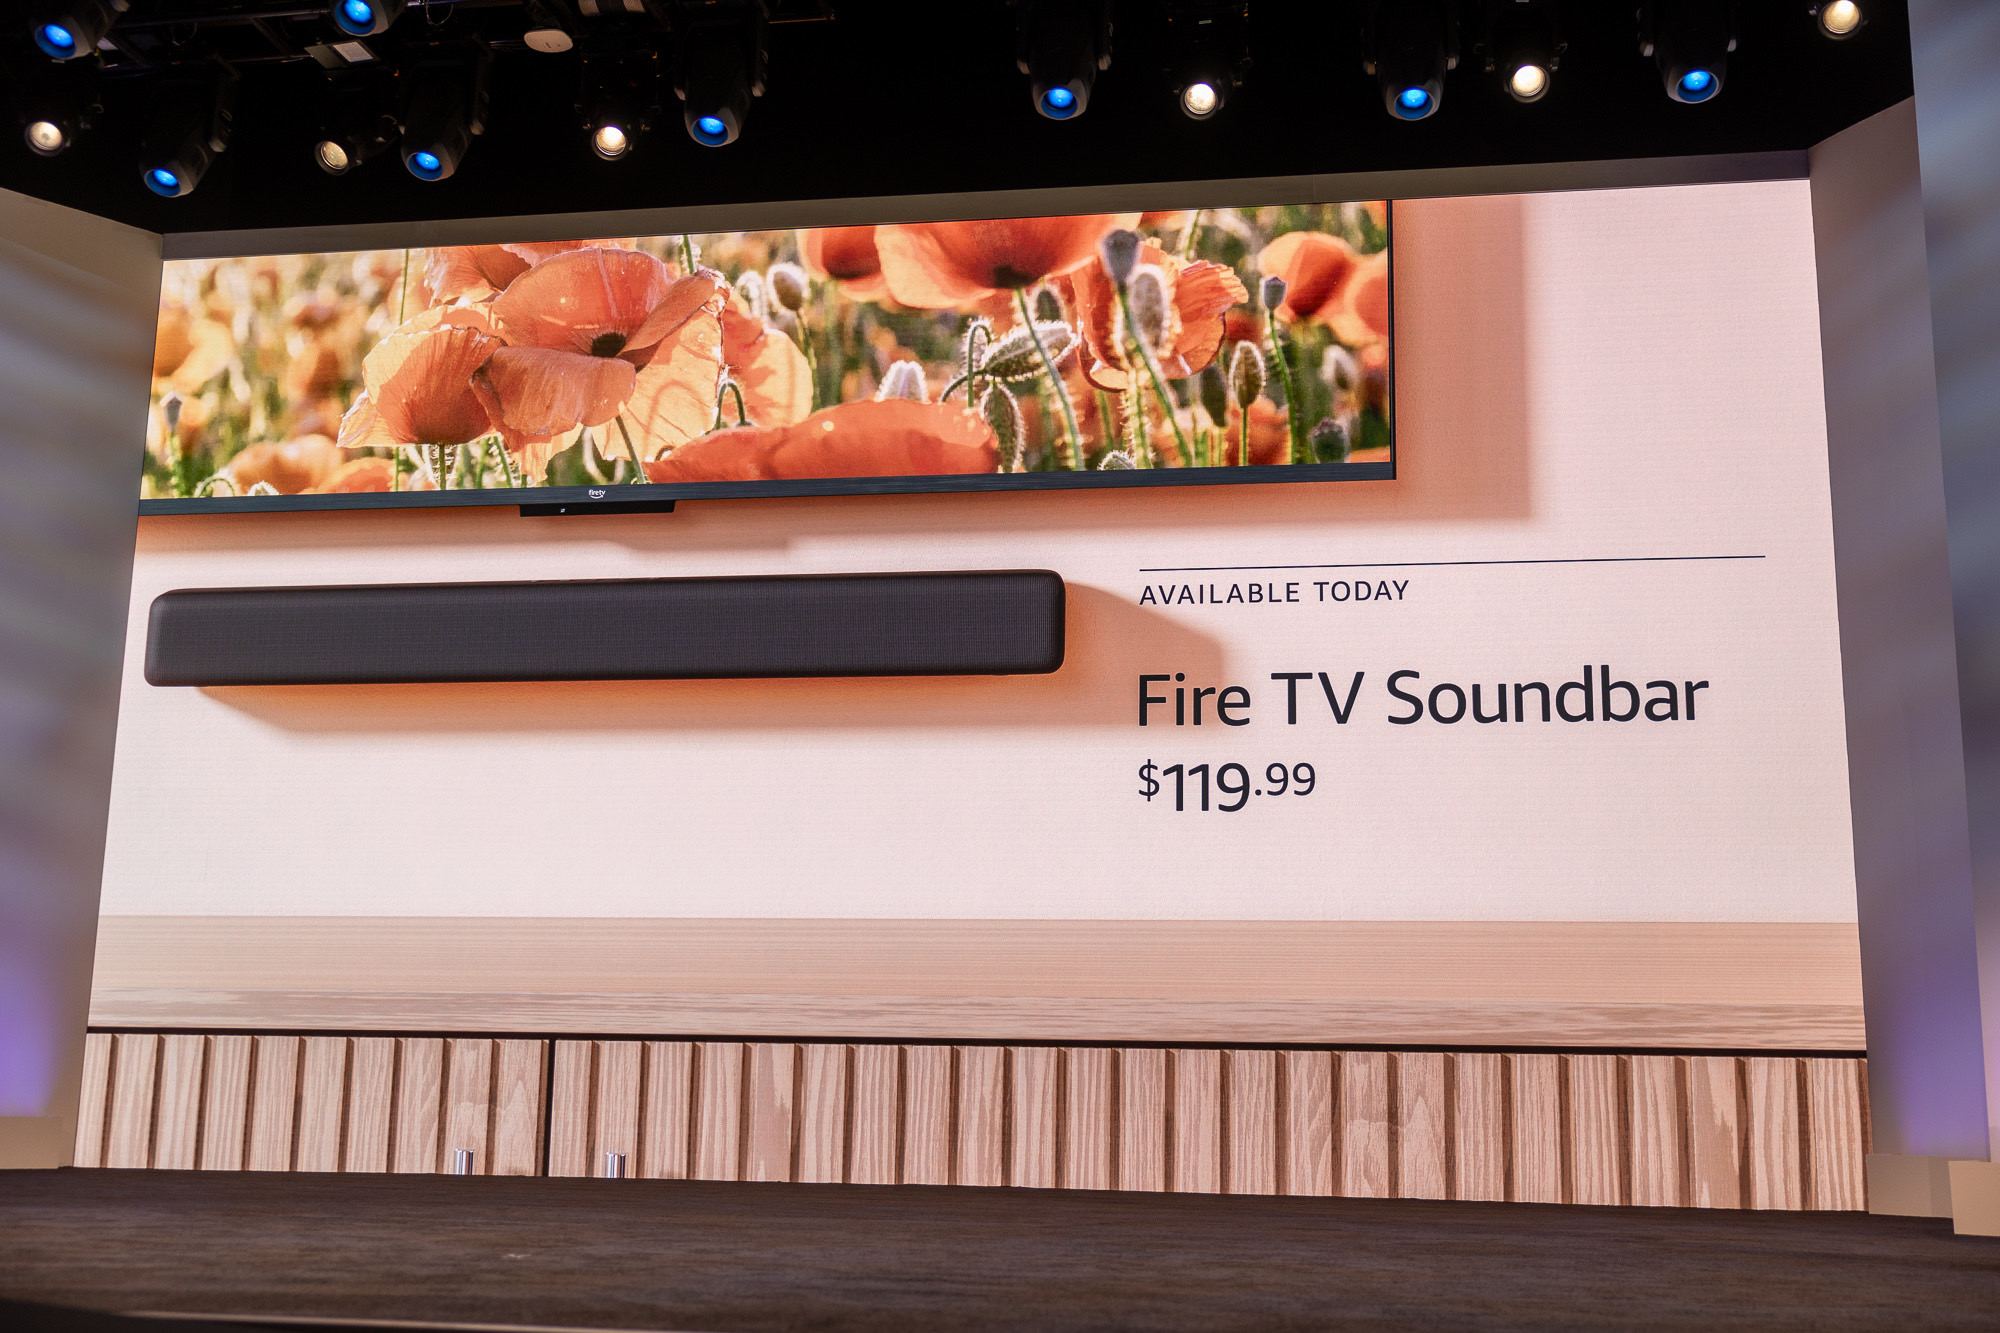 debuts its first Smart TV with Fire TV Stick tech built-in